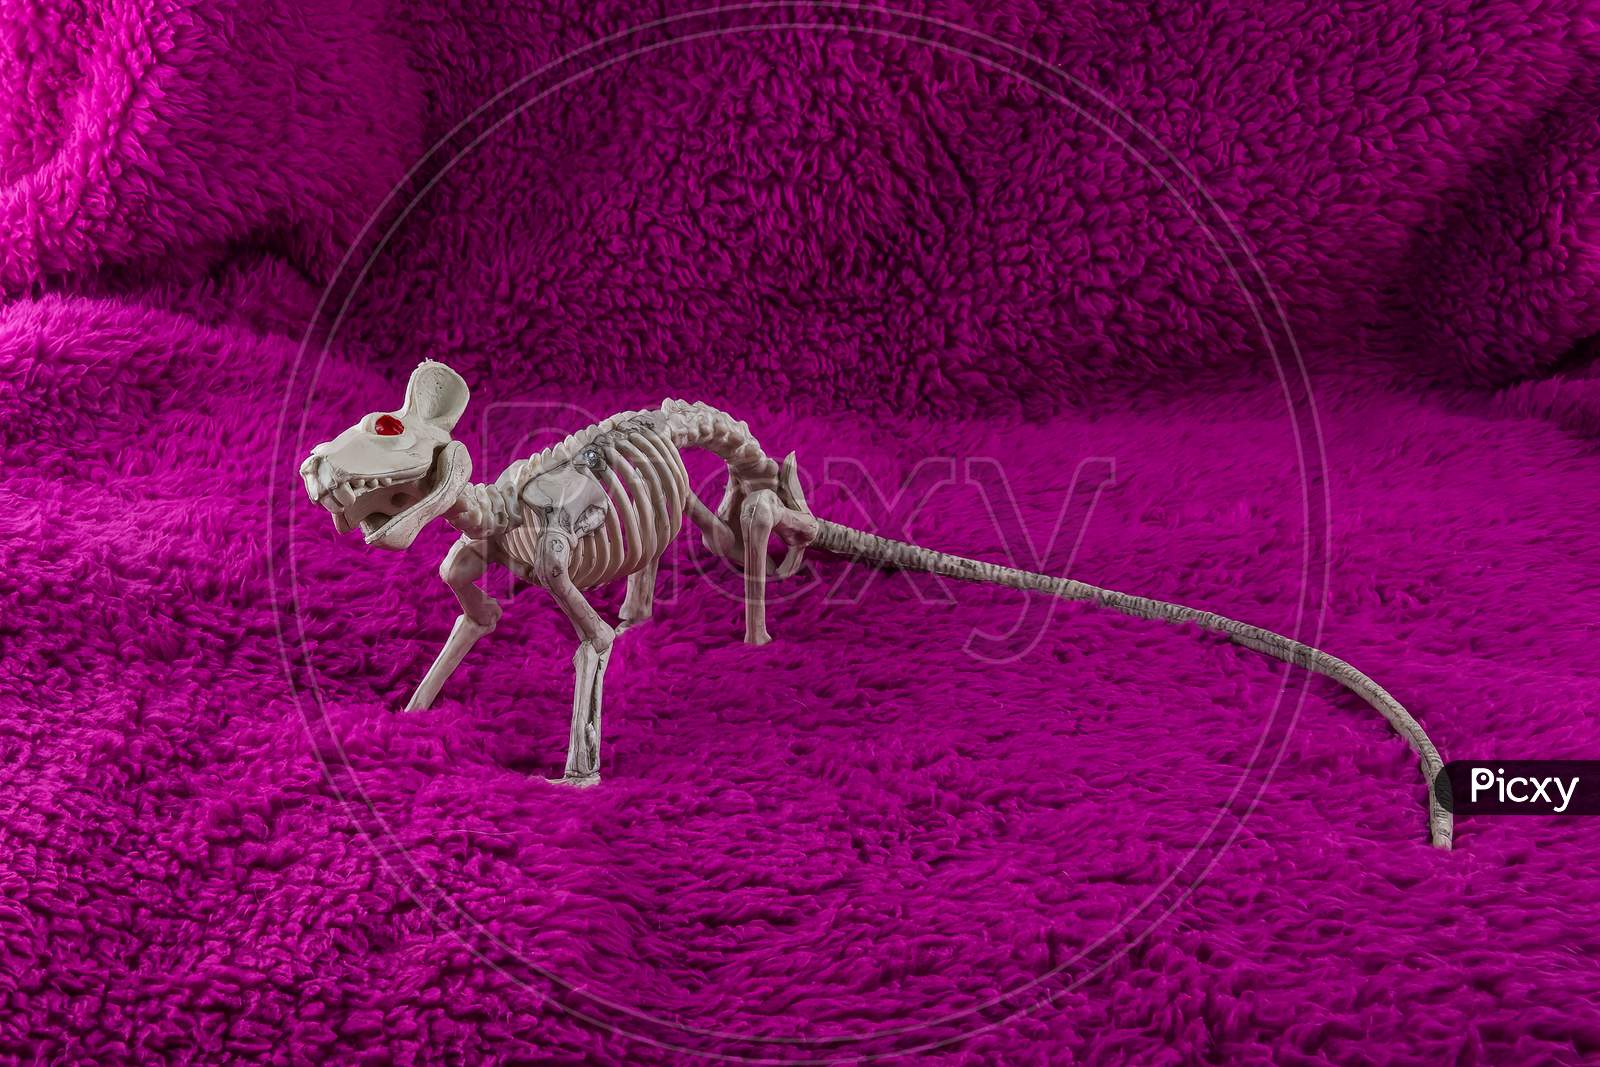 Scary Rat Skeleton With Red Eyes And Long Tail On Fluffy Purple Backdrop.